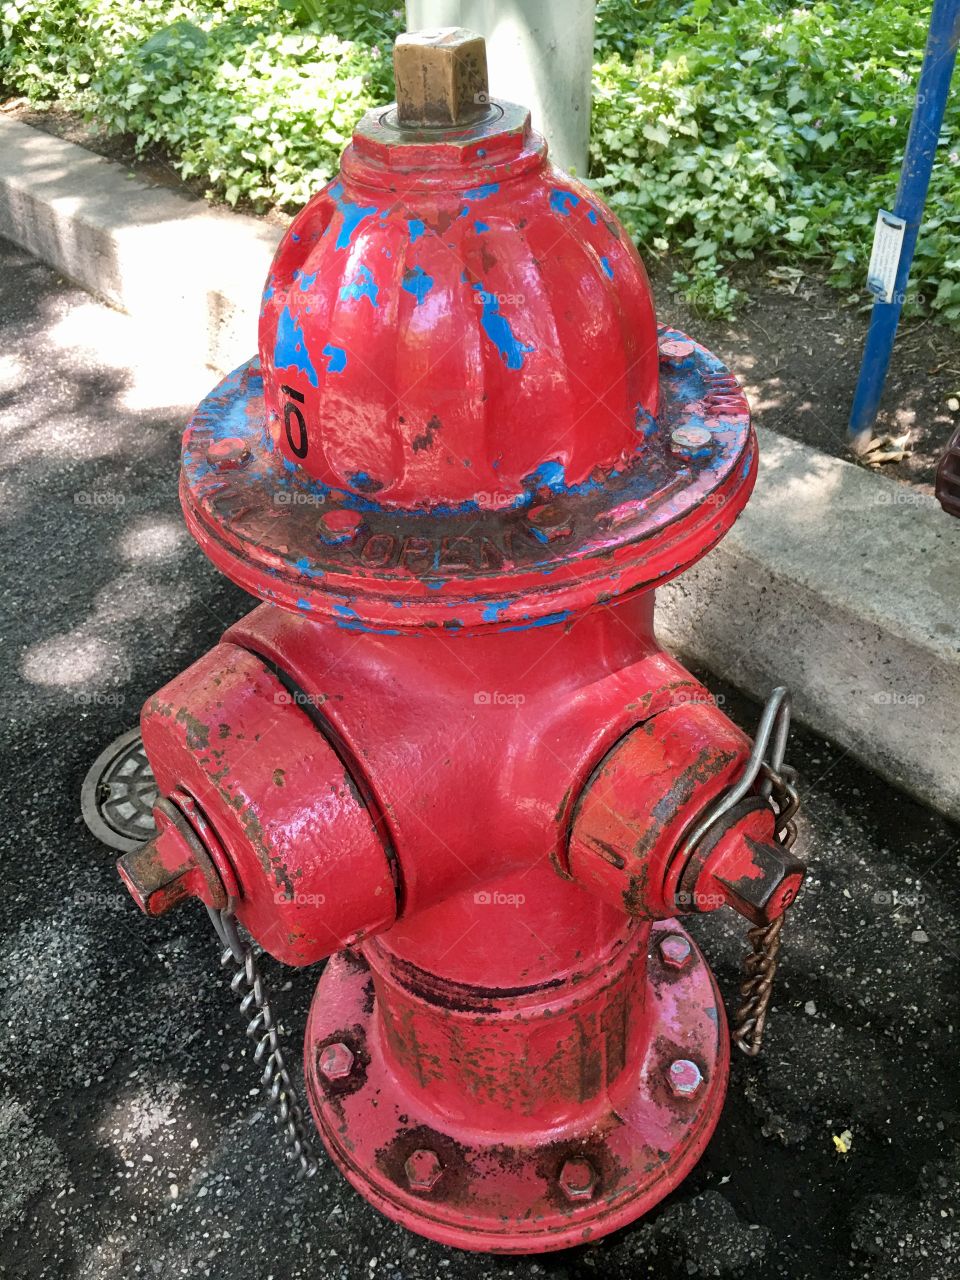 Perfect fire hydrant with a not so perfect paint job.